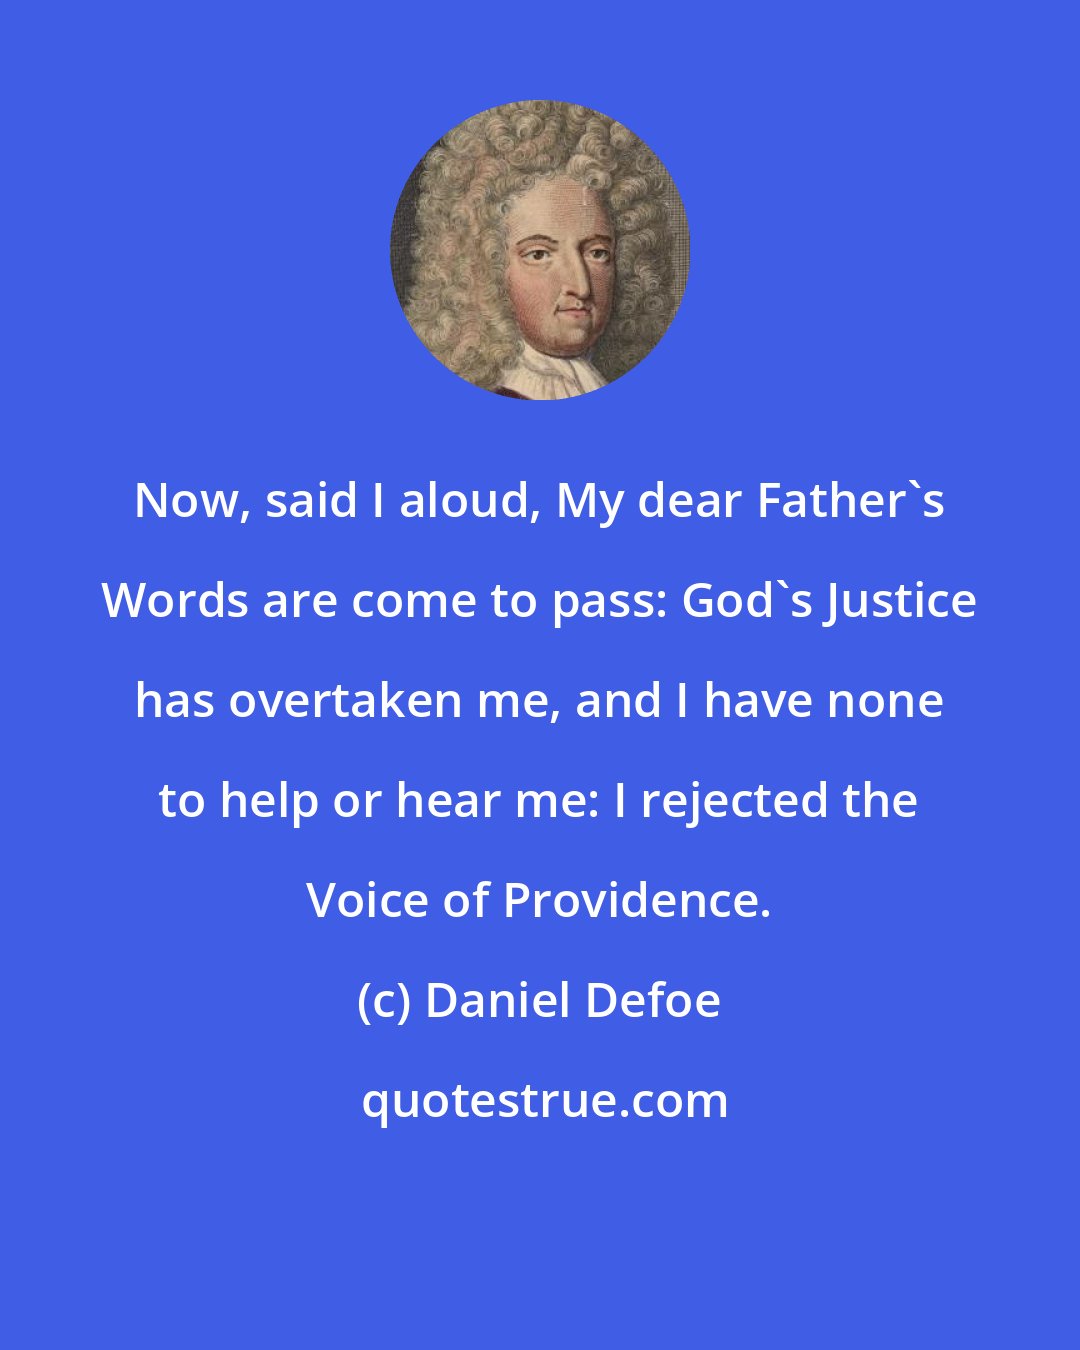 Daniel Defoe: Now, said I aloud, My dear Father's Words are come to pass: God's Justice has overtaken me, and I have none to help or hear me: I rejected the Voice of Providence.